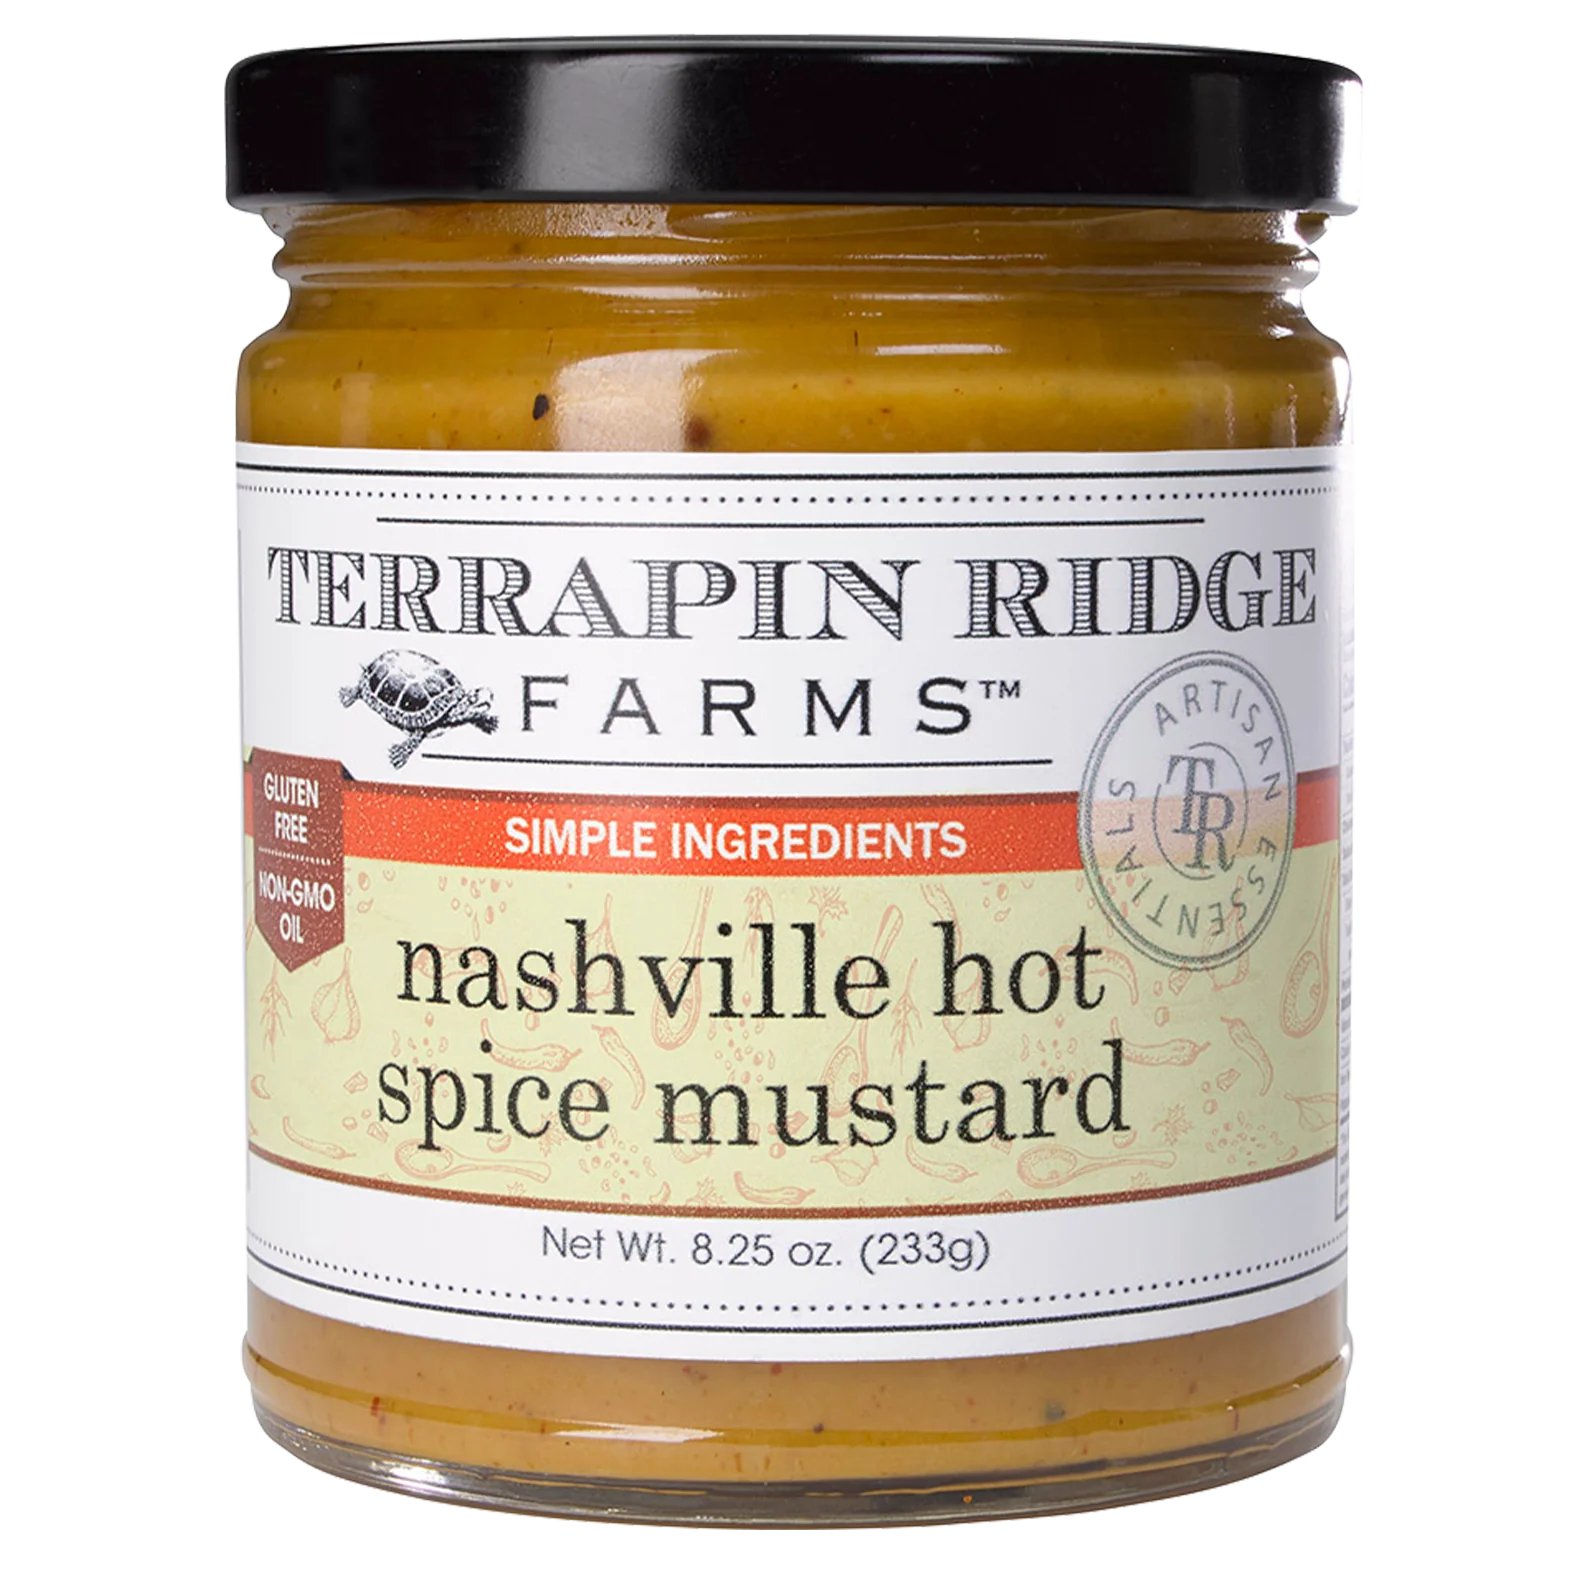 Terrapin Ridge Nashville Hot Spice Mustard is a creamy and spicy mustard infused with the bold flavors of Nashville Hot spice.